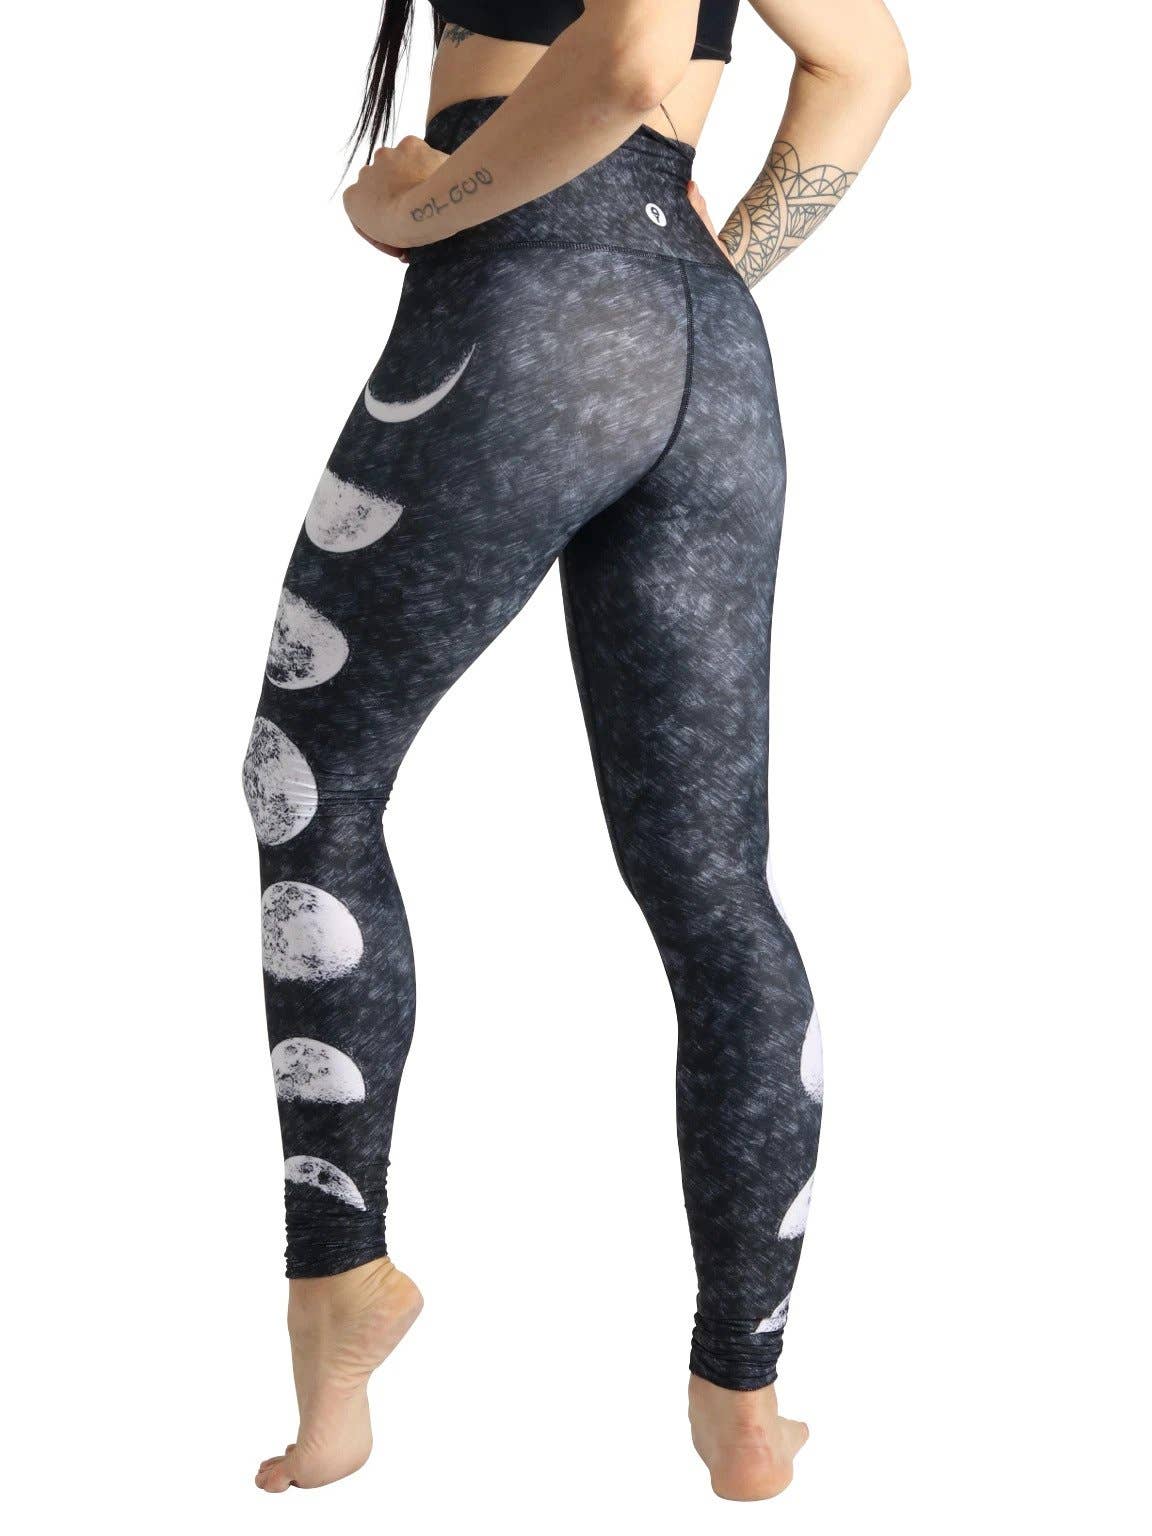 Wholesale Just a Dark Moon Phase Printed Yoga Leggings for your store ...